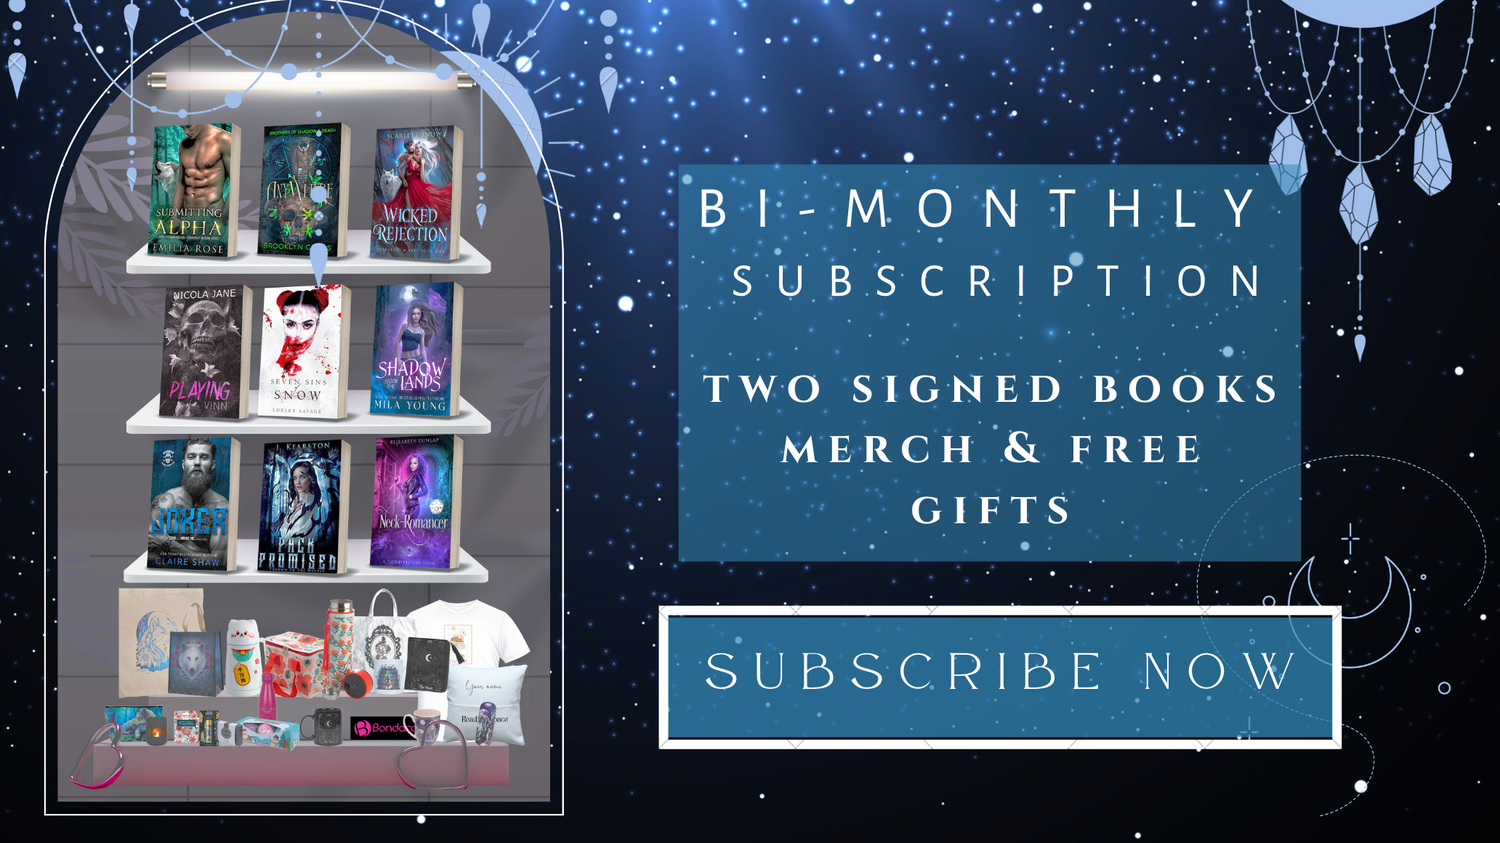 Bi-monthly book box subscription